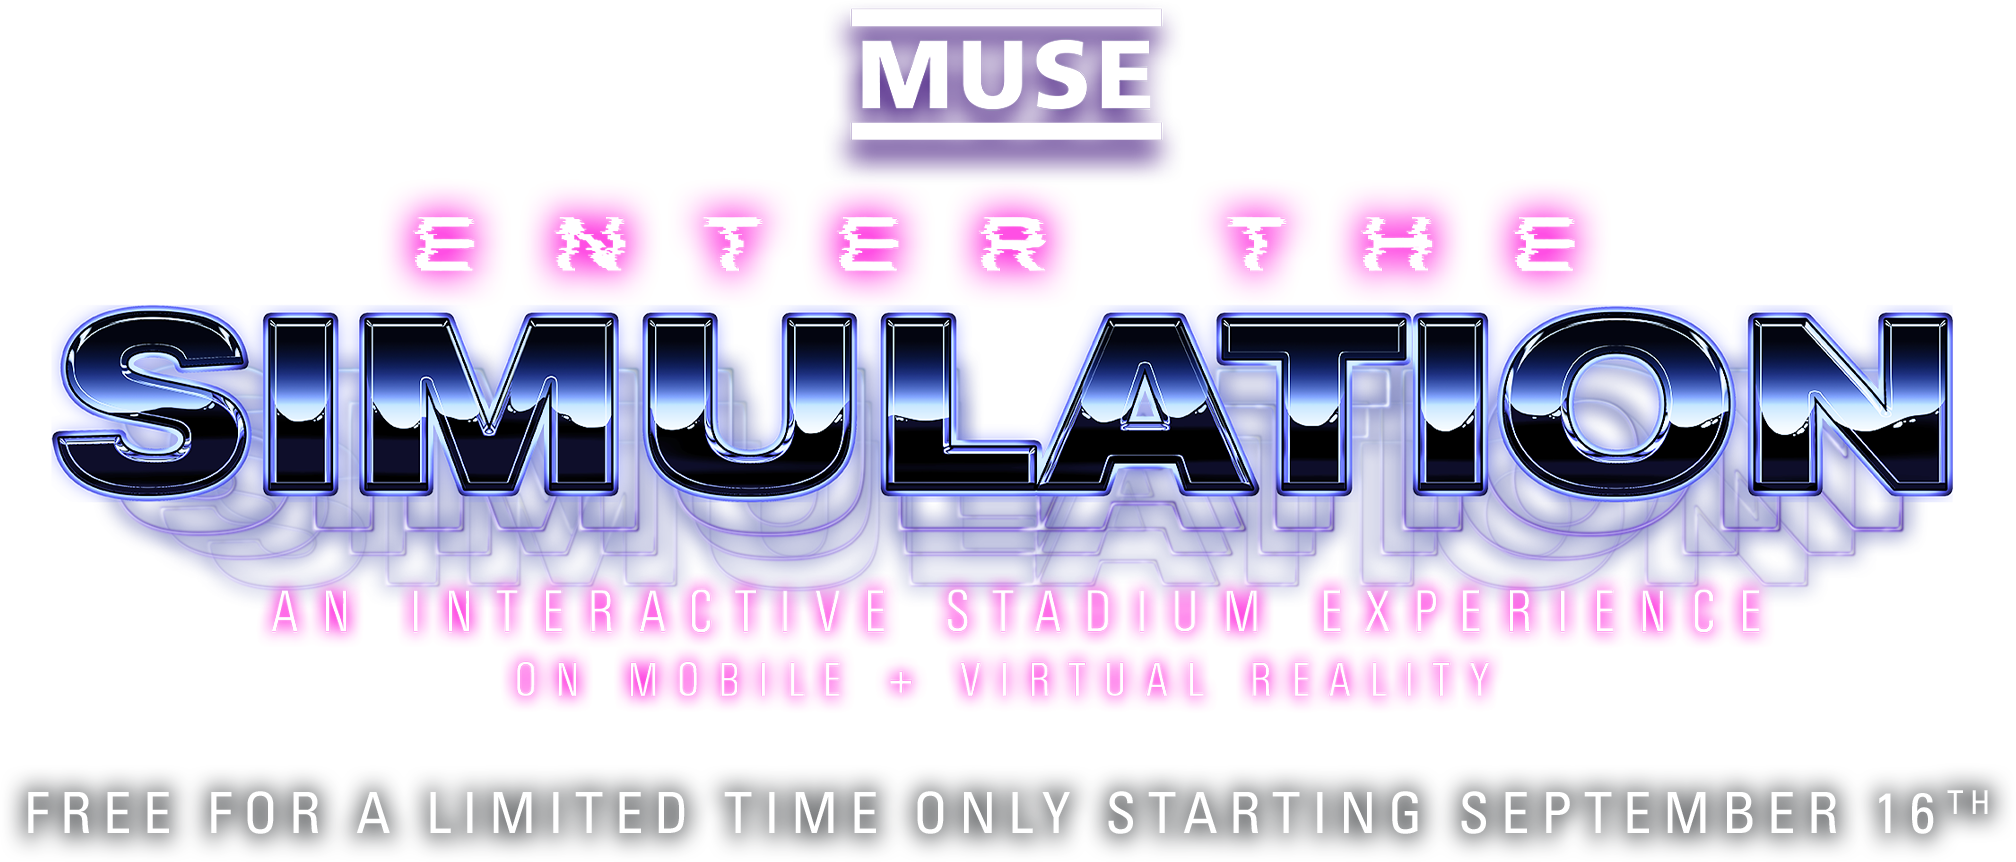 Muse - Enter The Simulation - An Interactive Stadium Experience On Mobile And Virtual Reality - Free For A Limited Time Only Starting September 16th